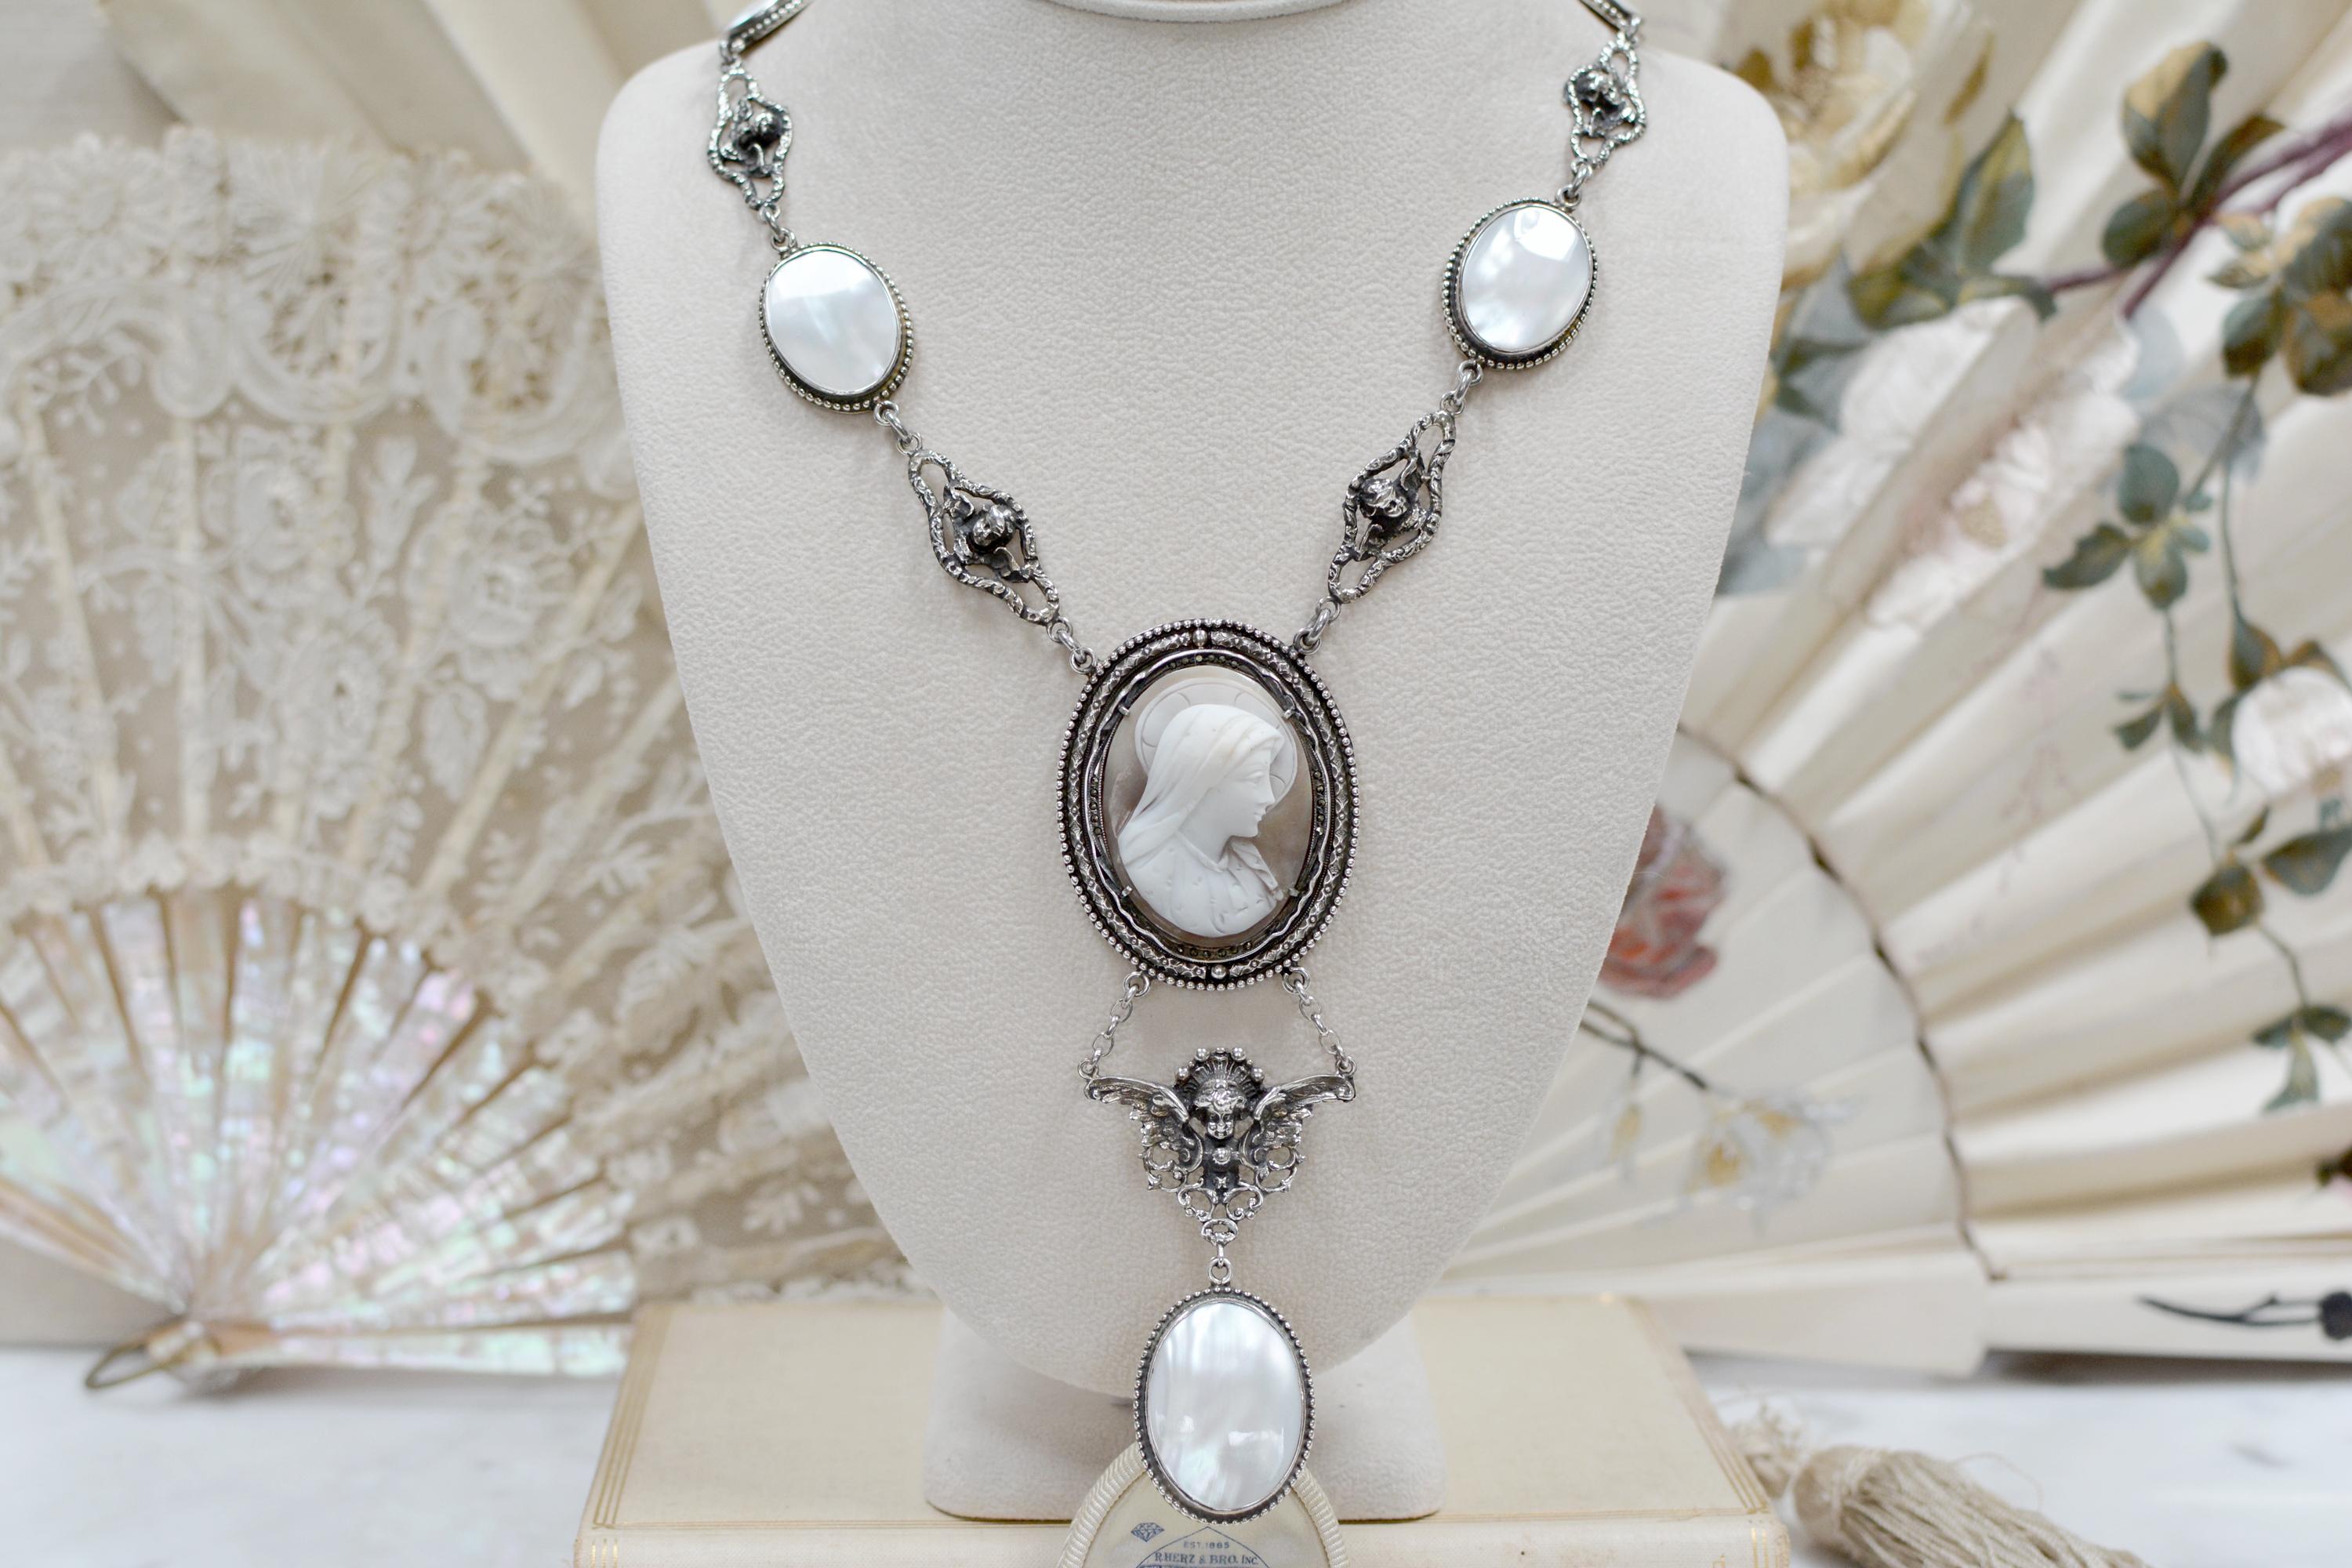 This exquisite lavalier style drop necklace by highlights a divinely hand-carved nineteenth-century Venetian cameo depicting Saint Mary which is framed in sterling silver with delicately engraved detailing and old-cut marcasites. The elaborate